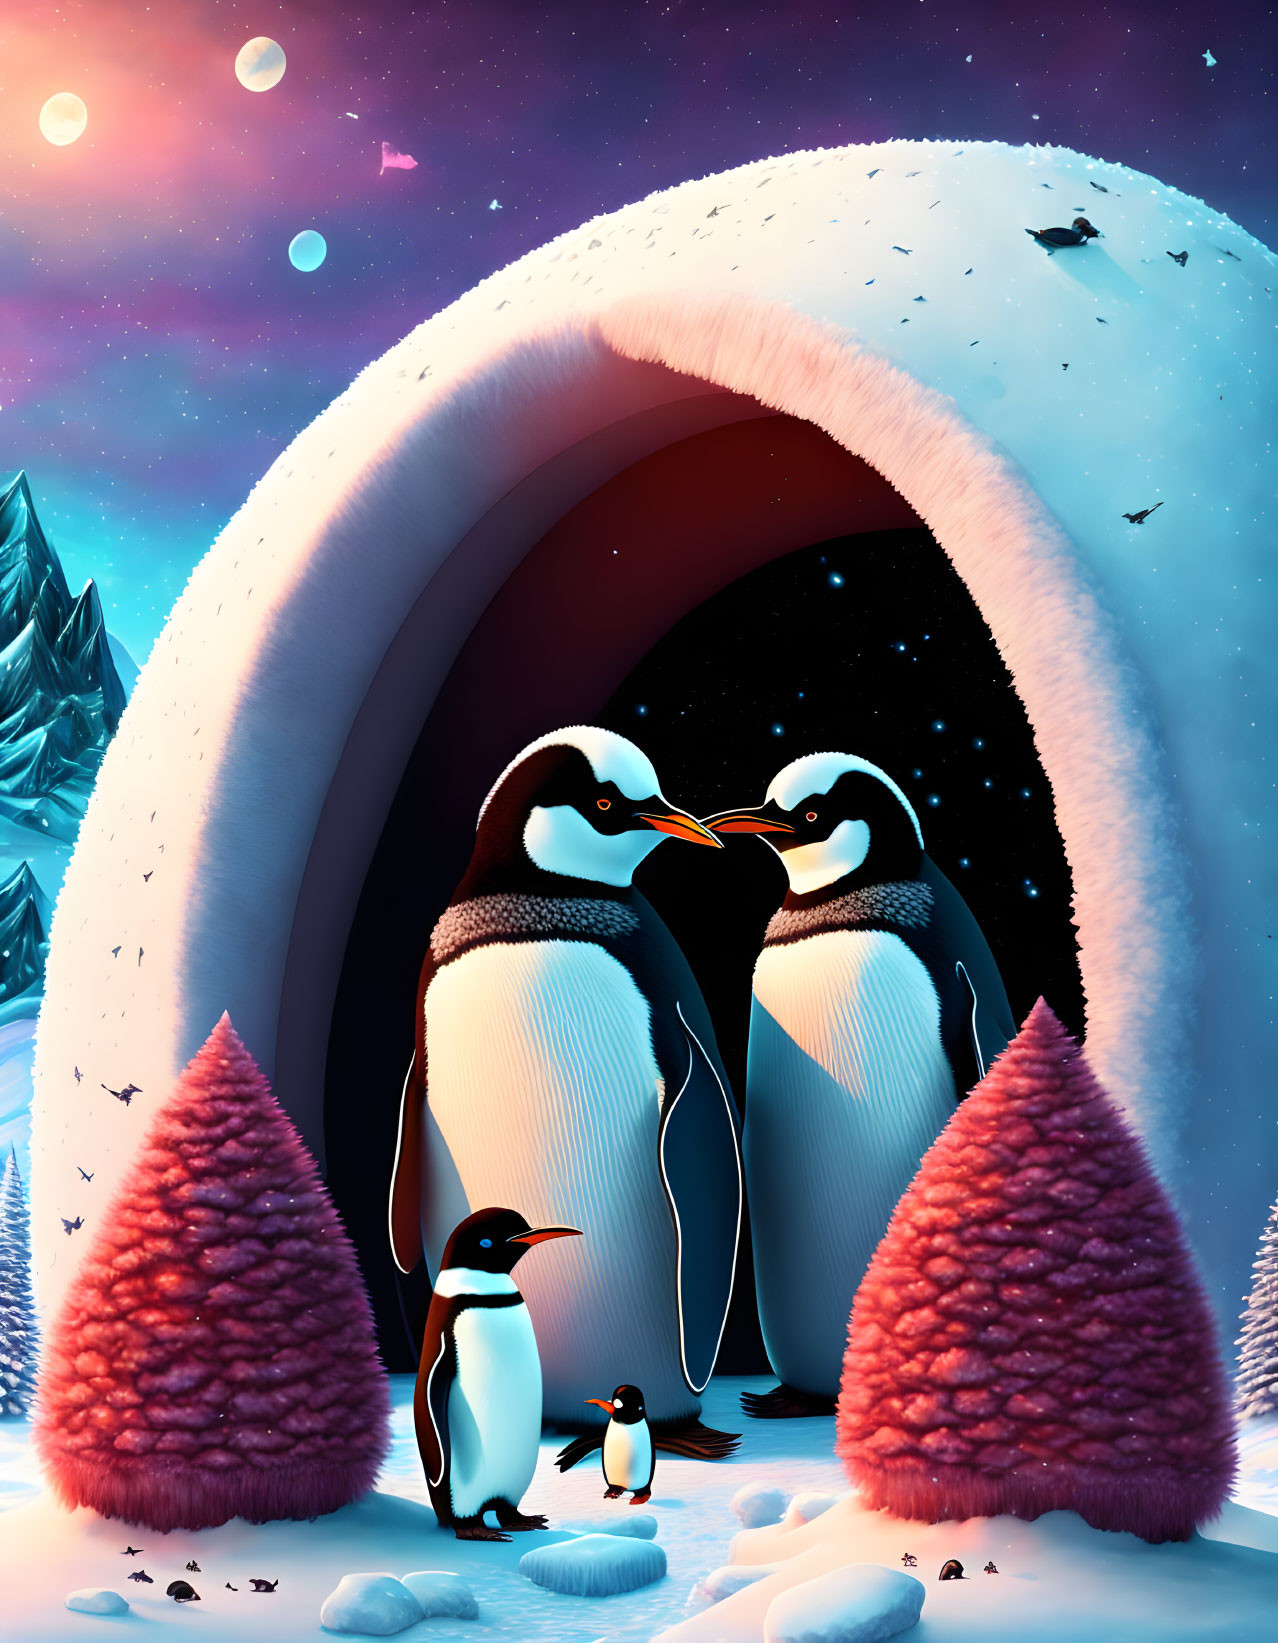 Penguins near igloo under starry sky with colorful trees and snowfall